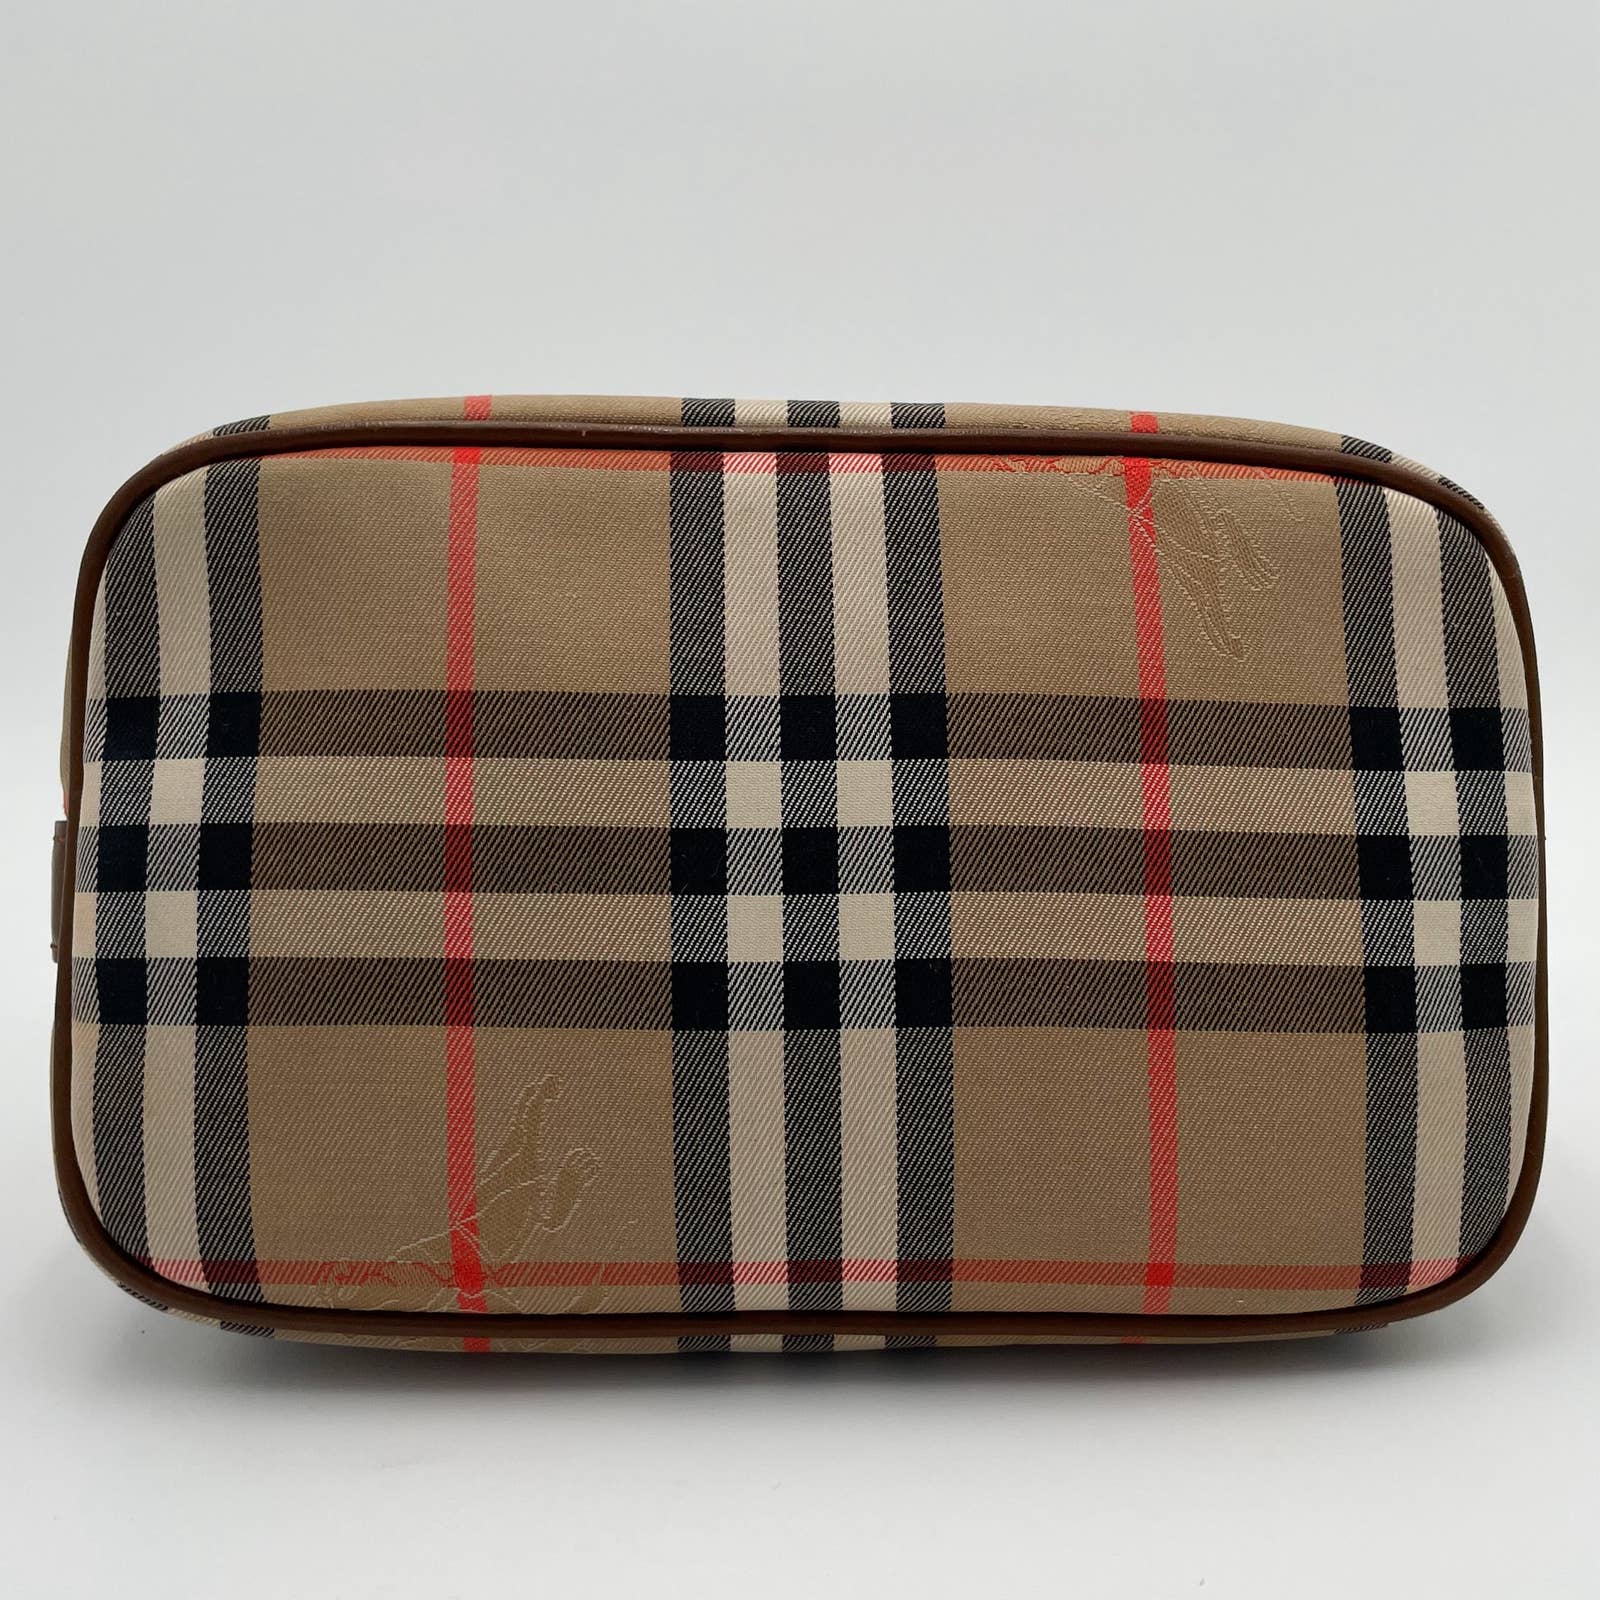 This Burberry Vintage House Check Bag showcases a rectangular design with the iconic beige, black, white, and red plaid pattern. The bag features brown edges and trim made of canvas with leather trim and a convenient zip top for easy access.